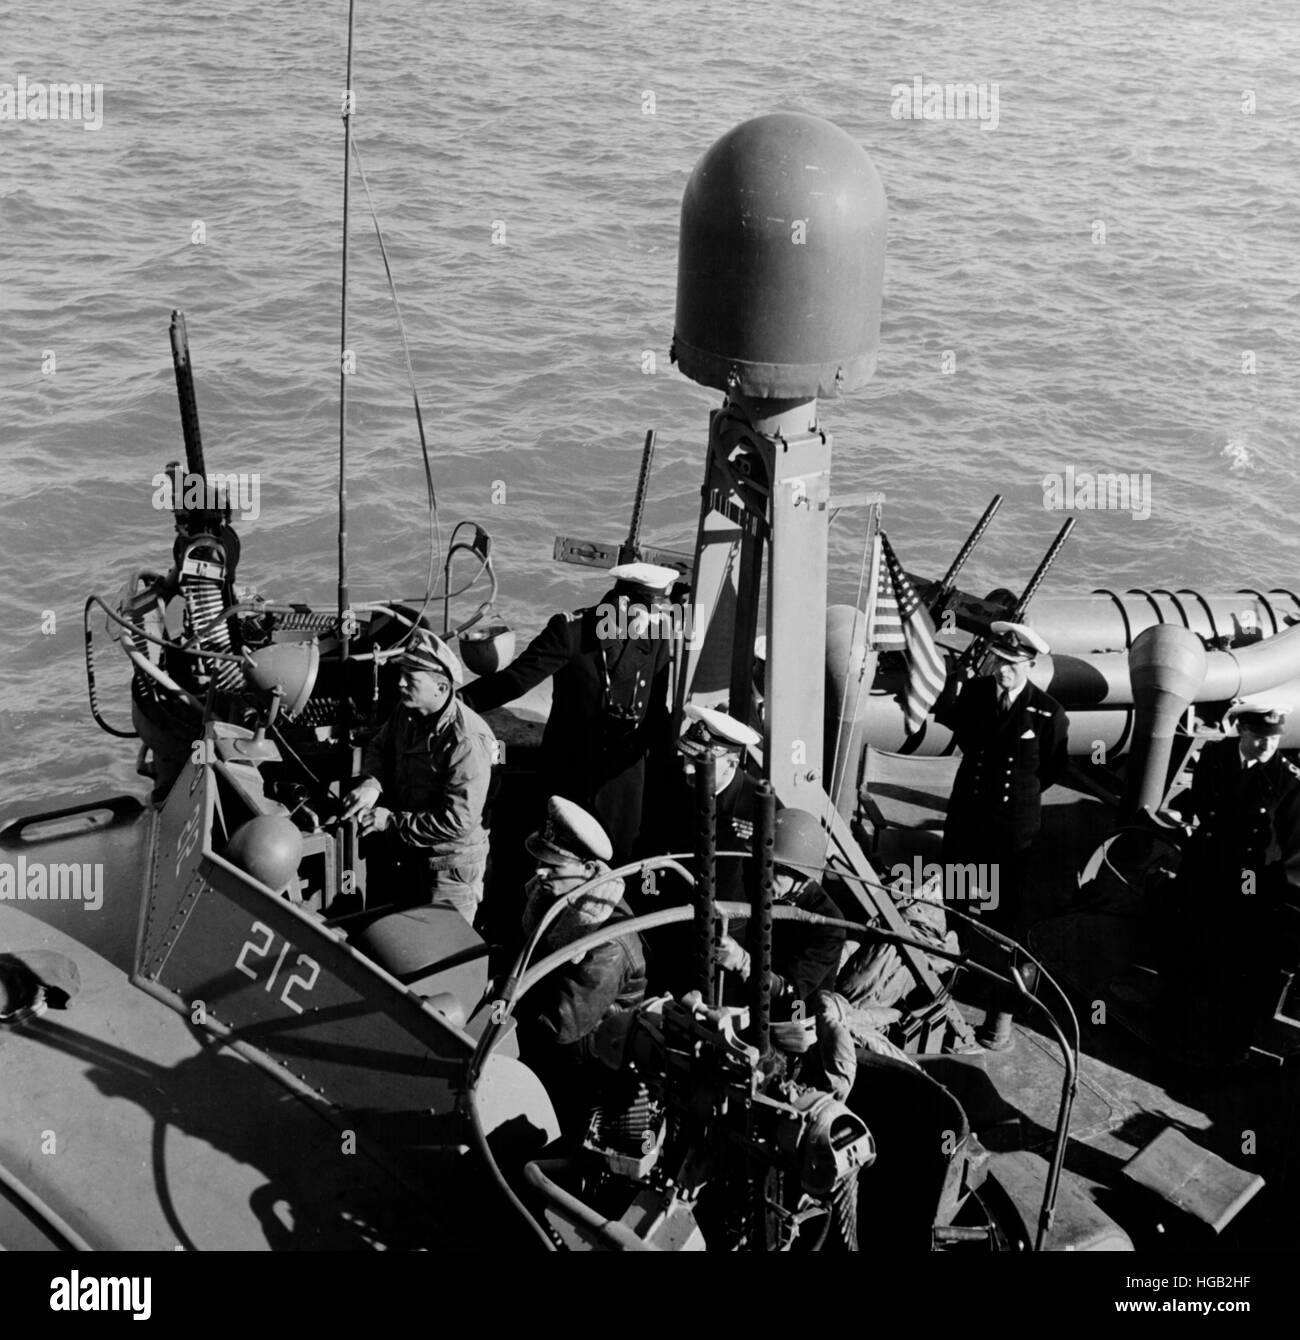 USS PT-212 with several British officers on board during World War II Stock Photo